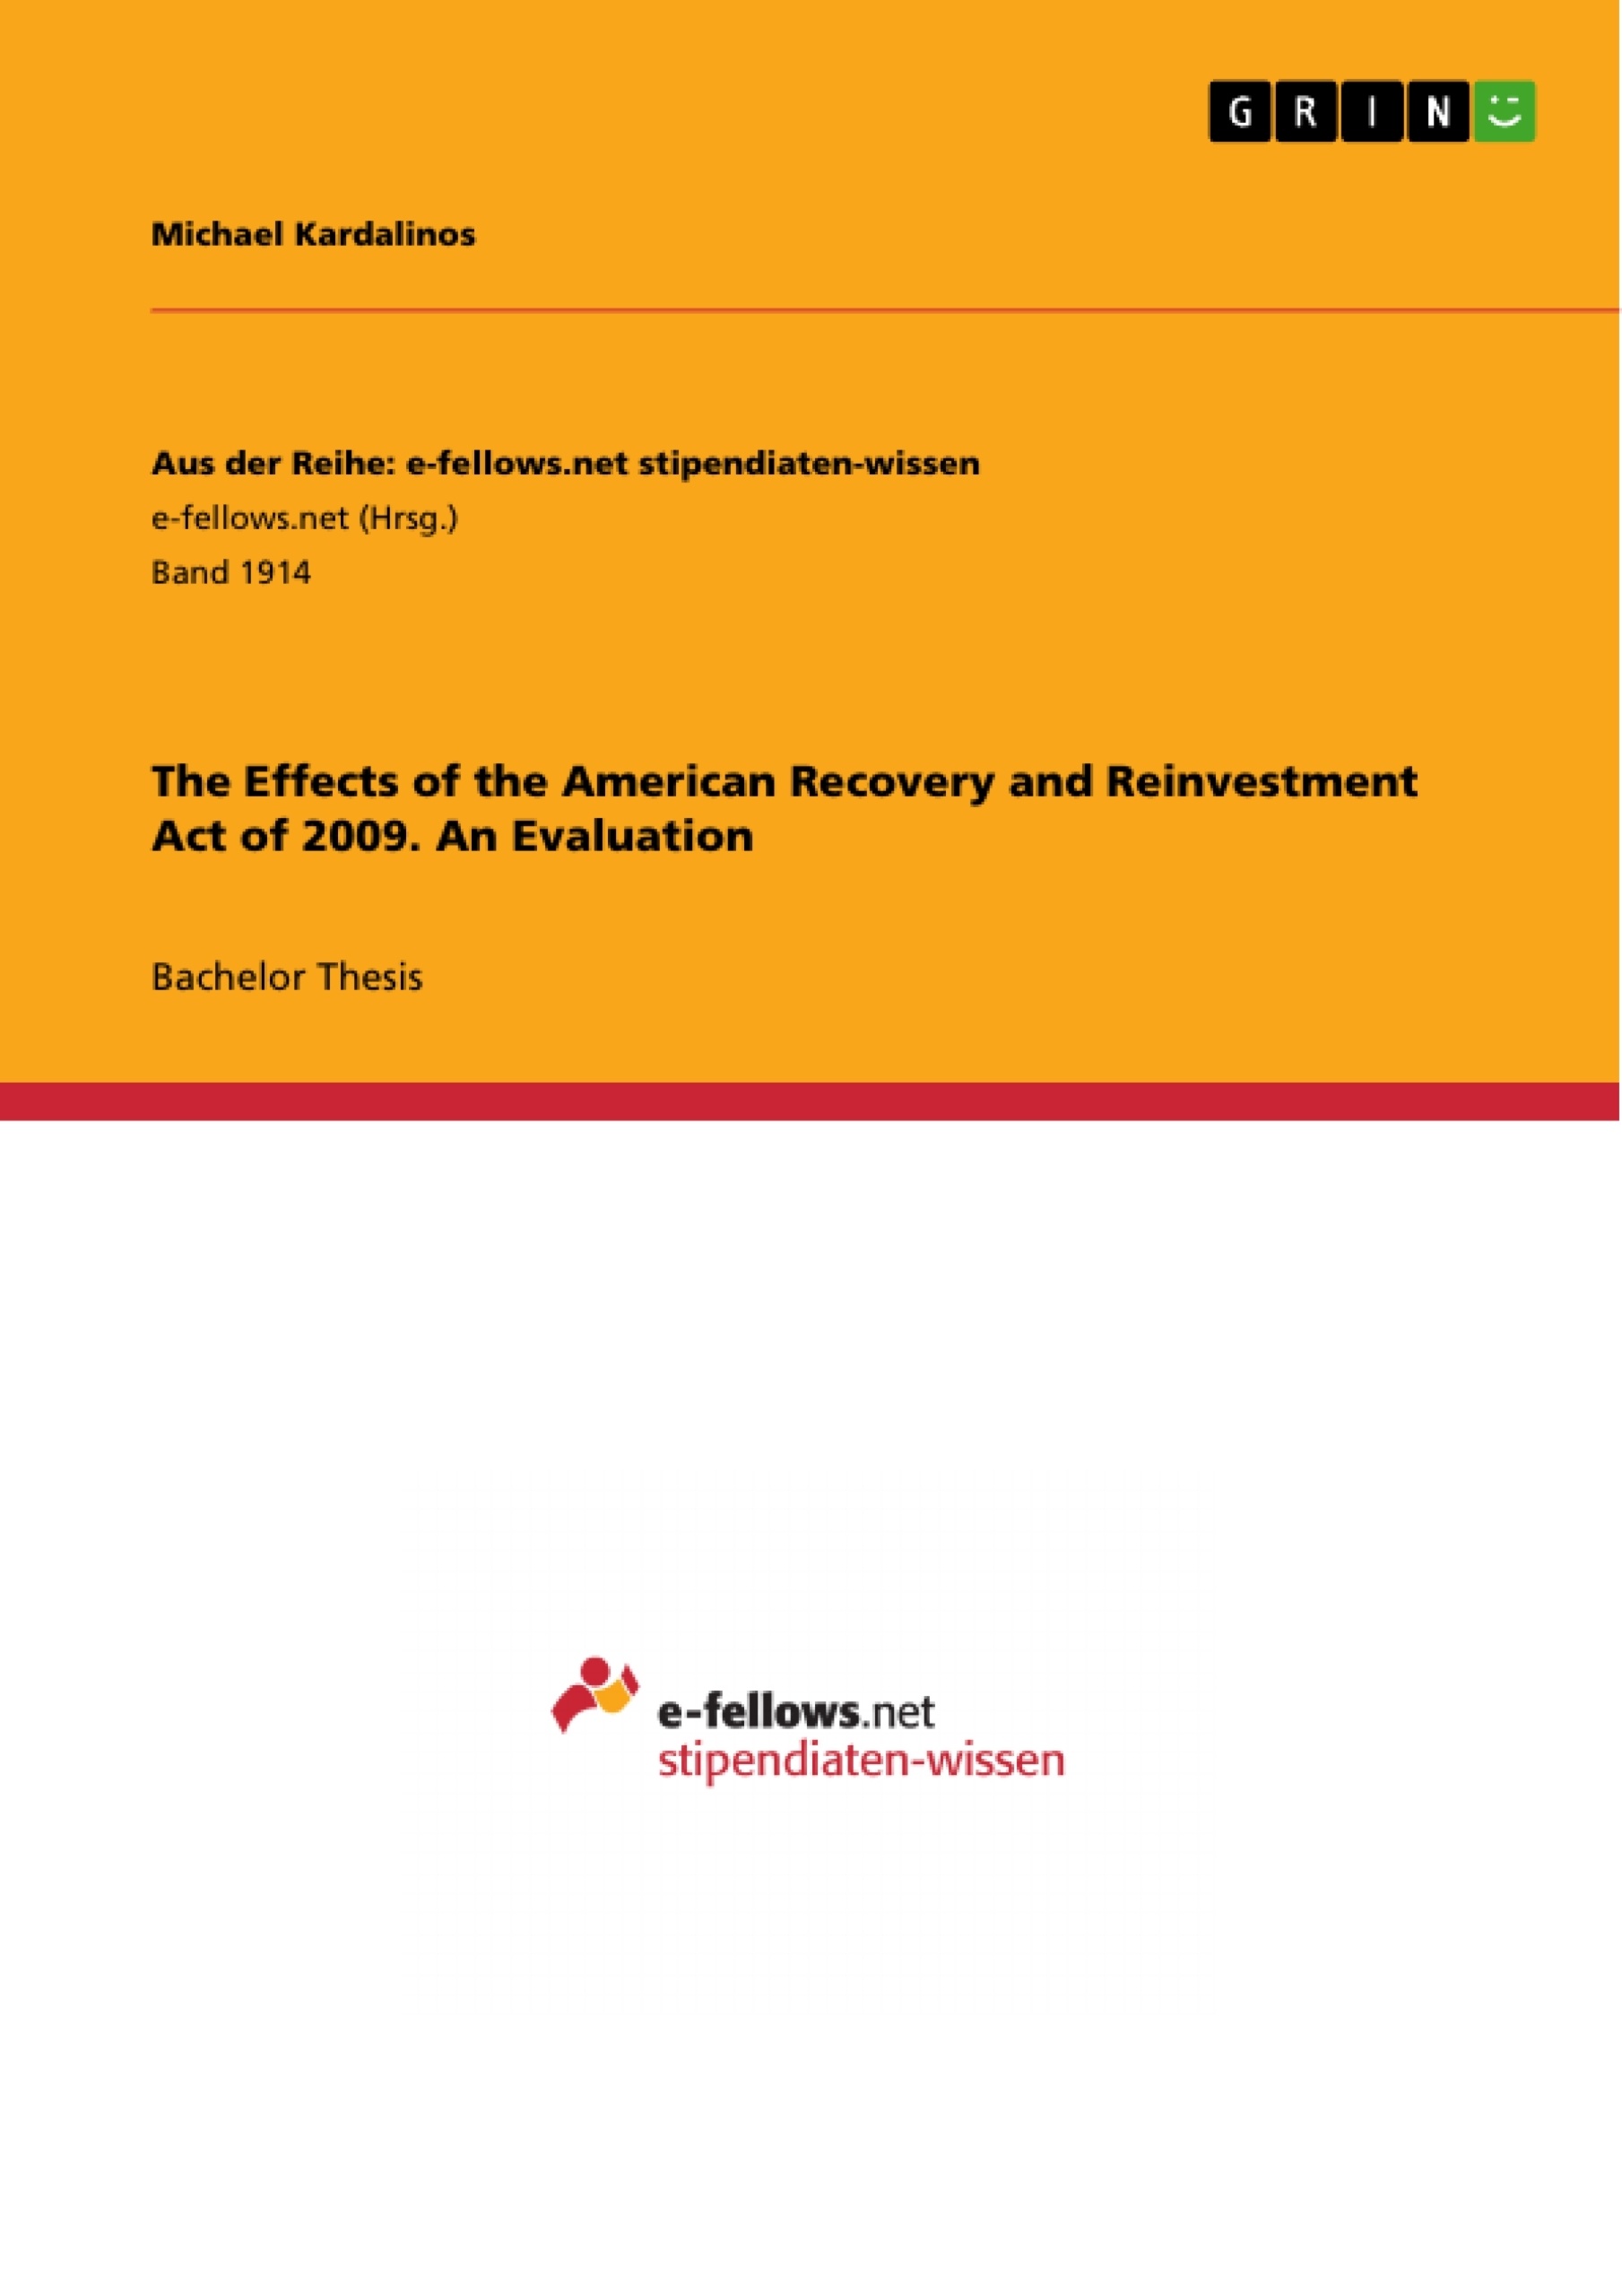 Titre: The Effects of the American Recovery and Reinvestment Act of 2009. An Evaluation